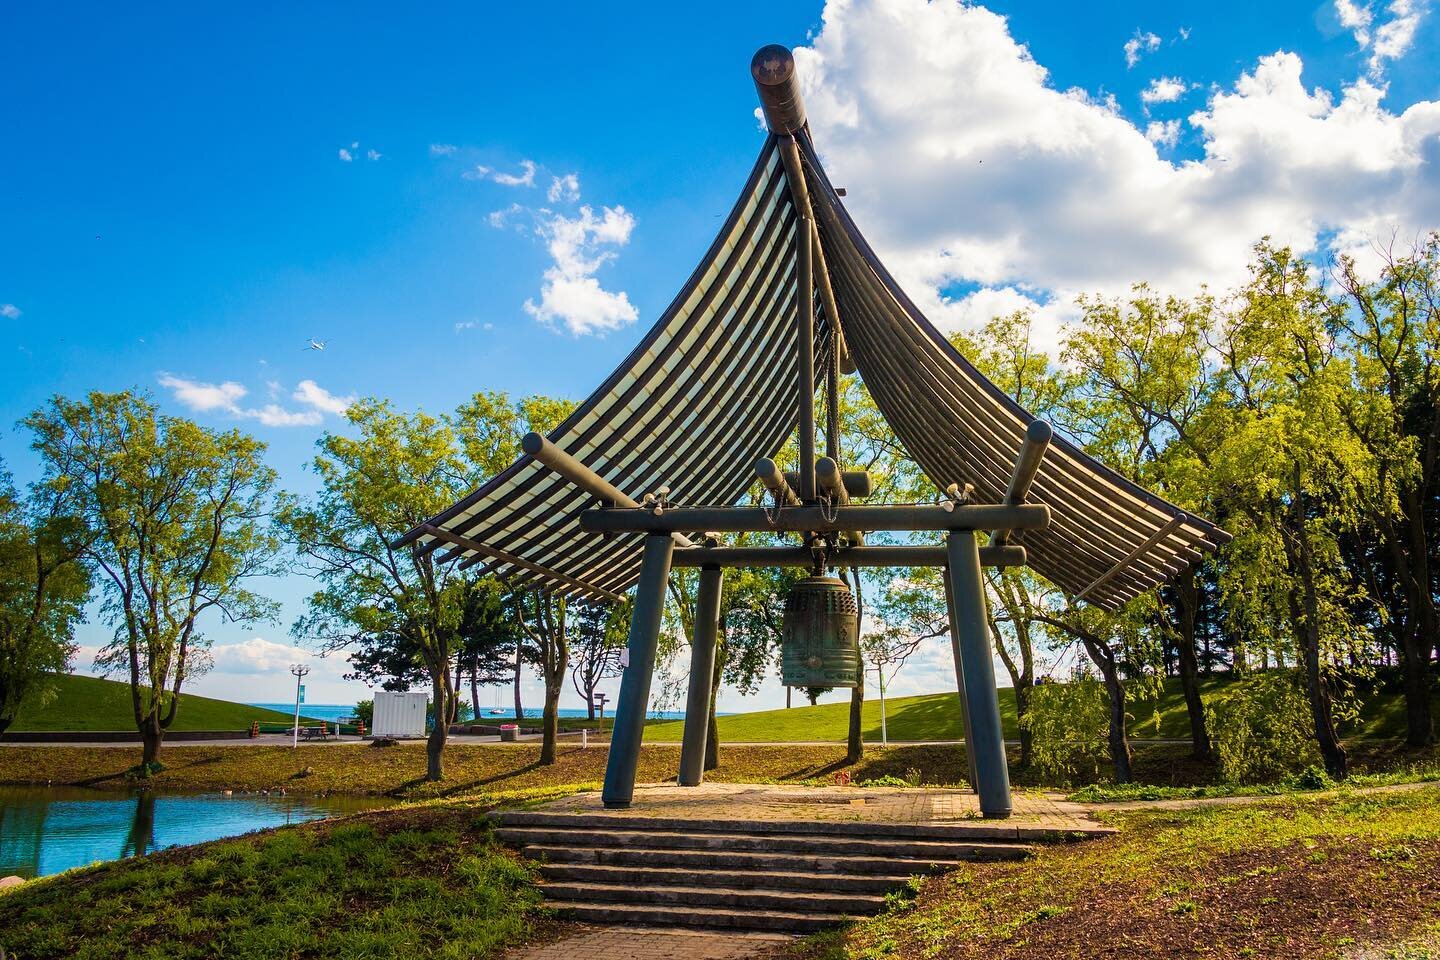 &ldquo;Dismantling of the Japanese Canadian Centennial Bell at Ontario Place begins on Mon, Sept 25. A striker will be installed over the weekend to ring it in its original location for the last time&rdquo; #ontarioplace #saveontarioplace #savemoriya